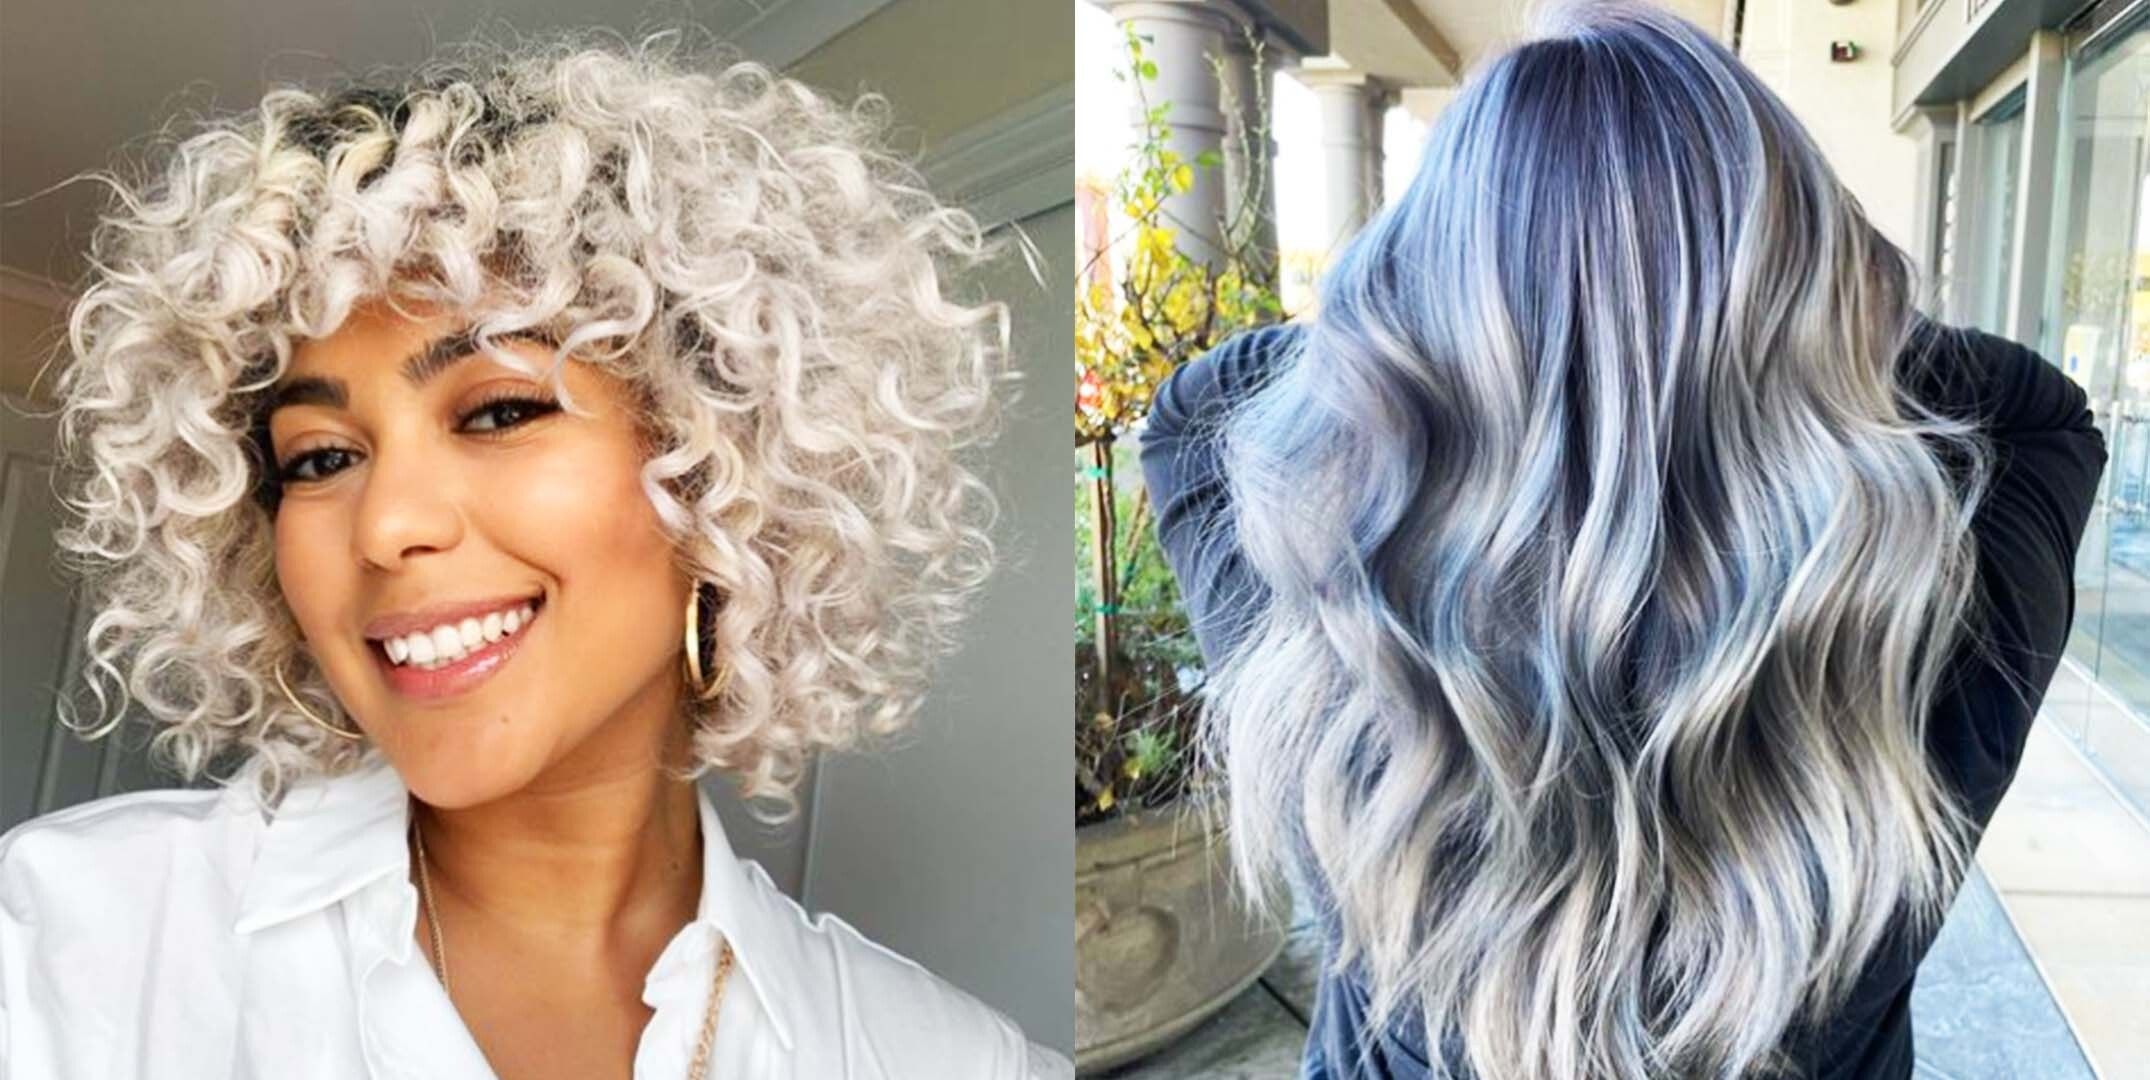 1. "Blue Hair Highlights for Short Hair: 10 Stunning Ideas for Your Next Look" - wide 9